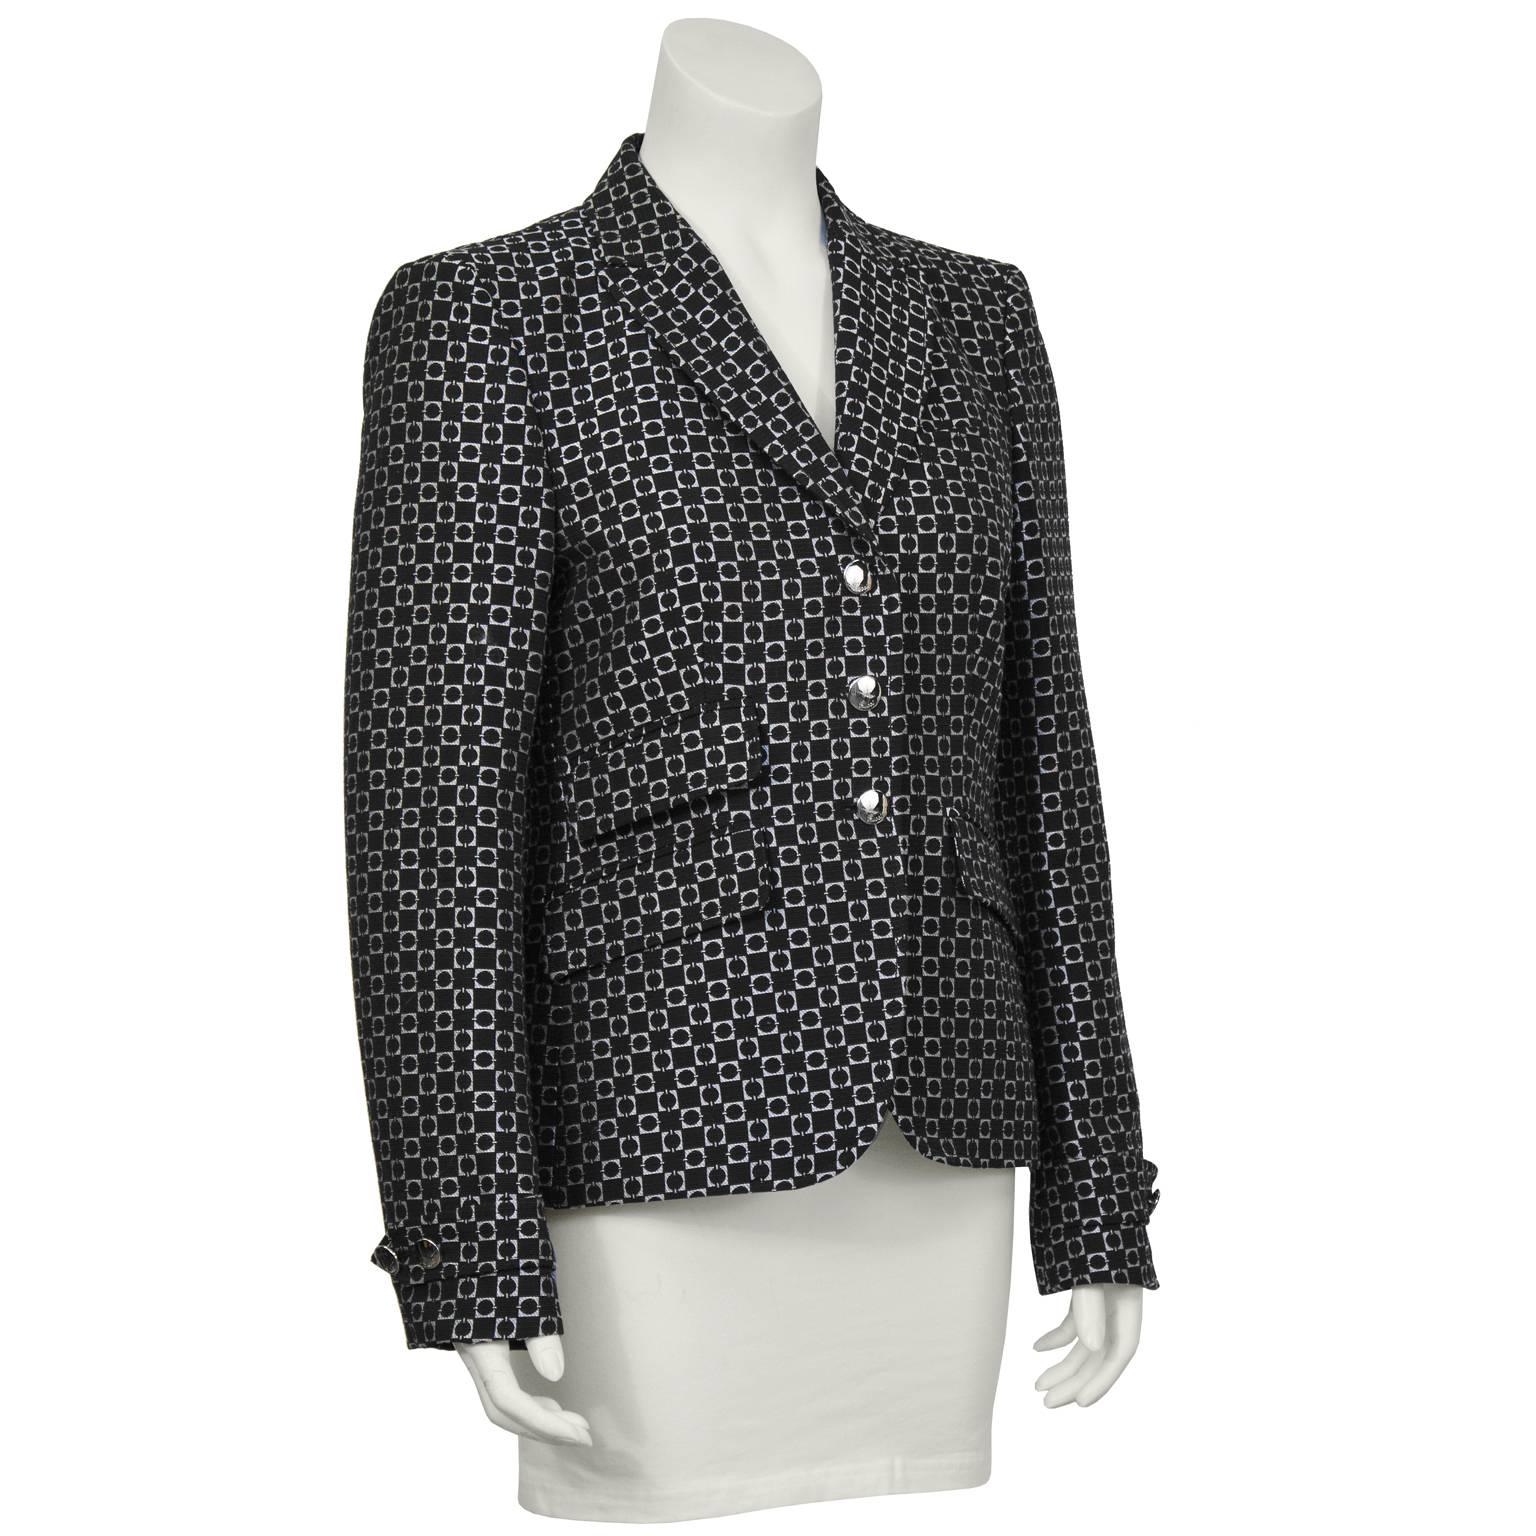 Gucci cotton silk blend blazer from the Fall 2007 runway with an allover geometric black and white print. The fitted jacket features a notched collar, 3 top flap front pockets and silvertone buttons with a cursive Gucci logo on them. Added detail on